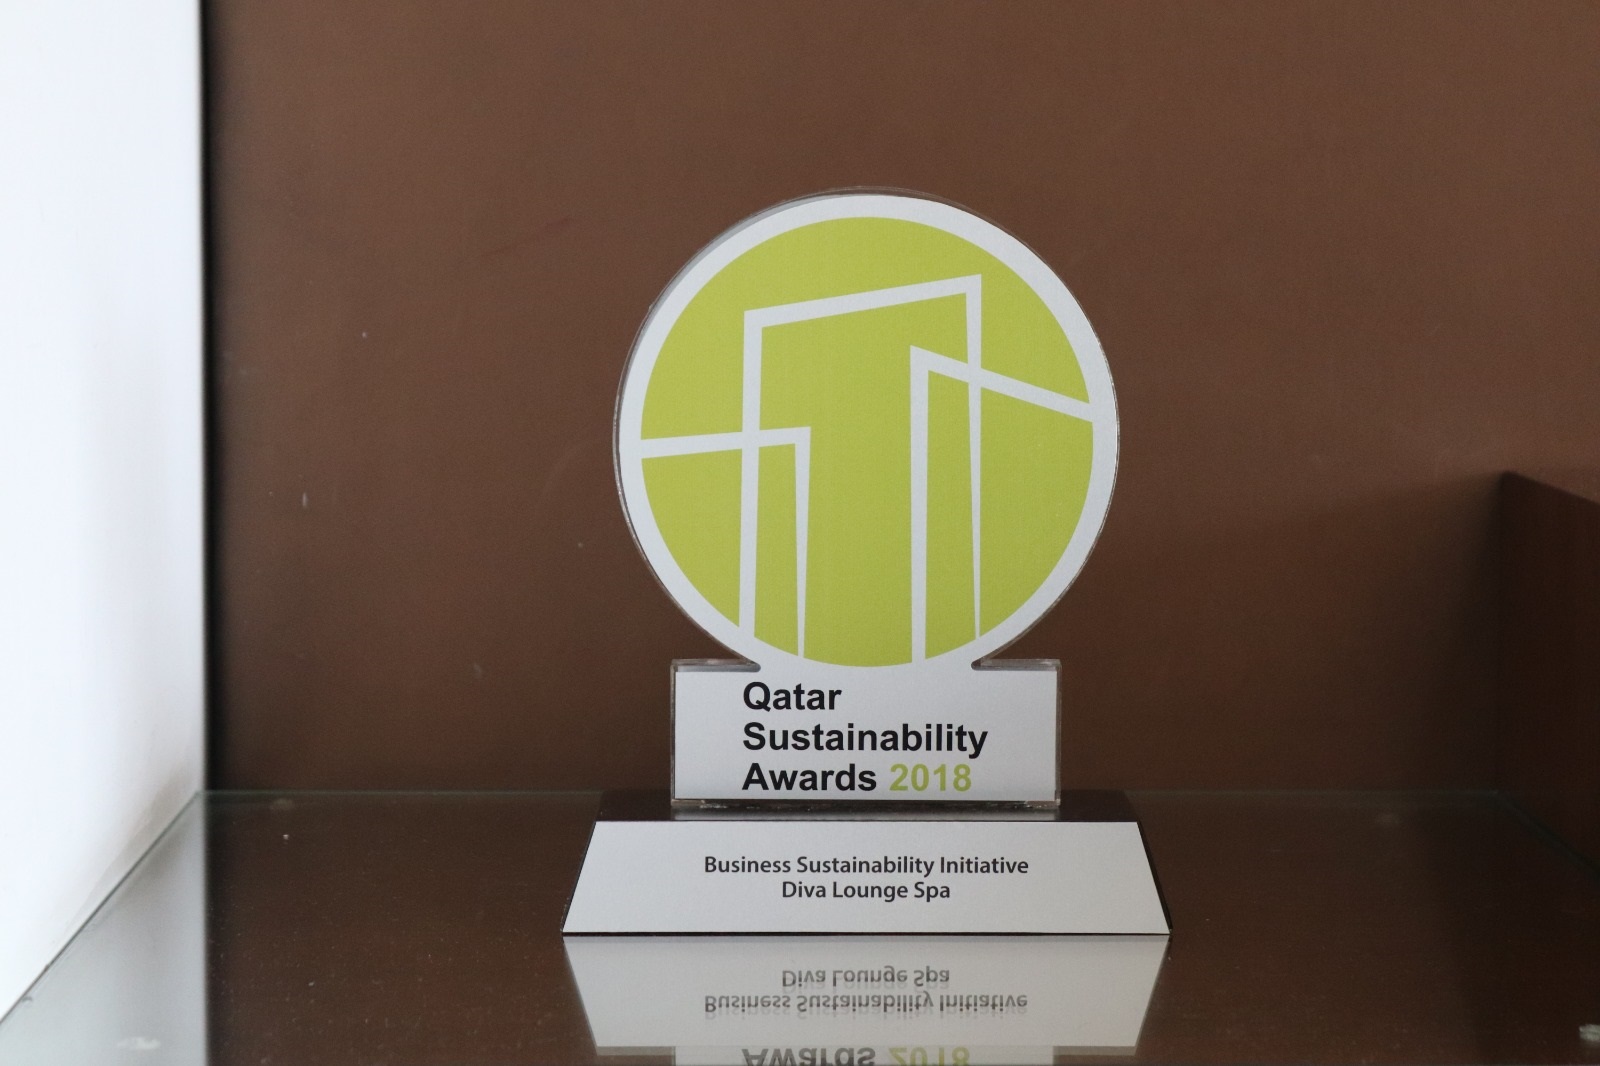 We have been awarded the Business Sustainability Initiative Award 2018